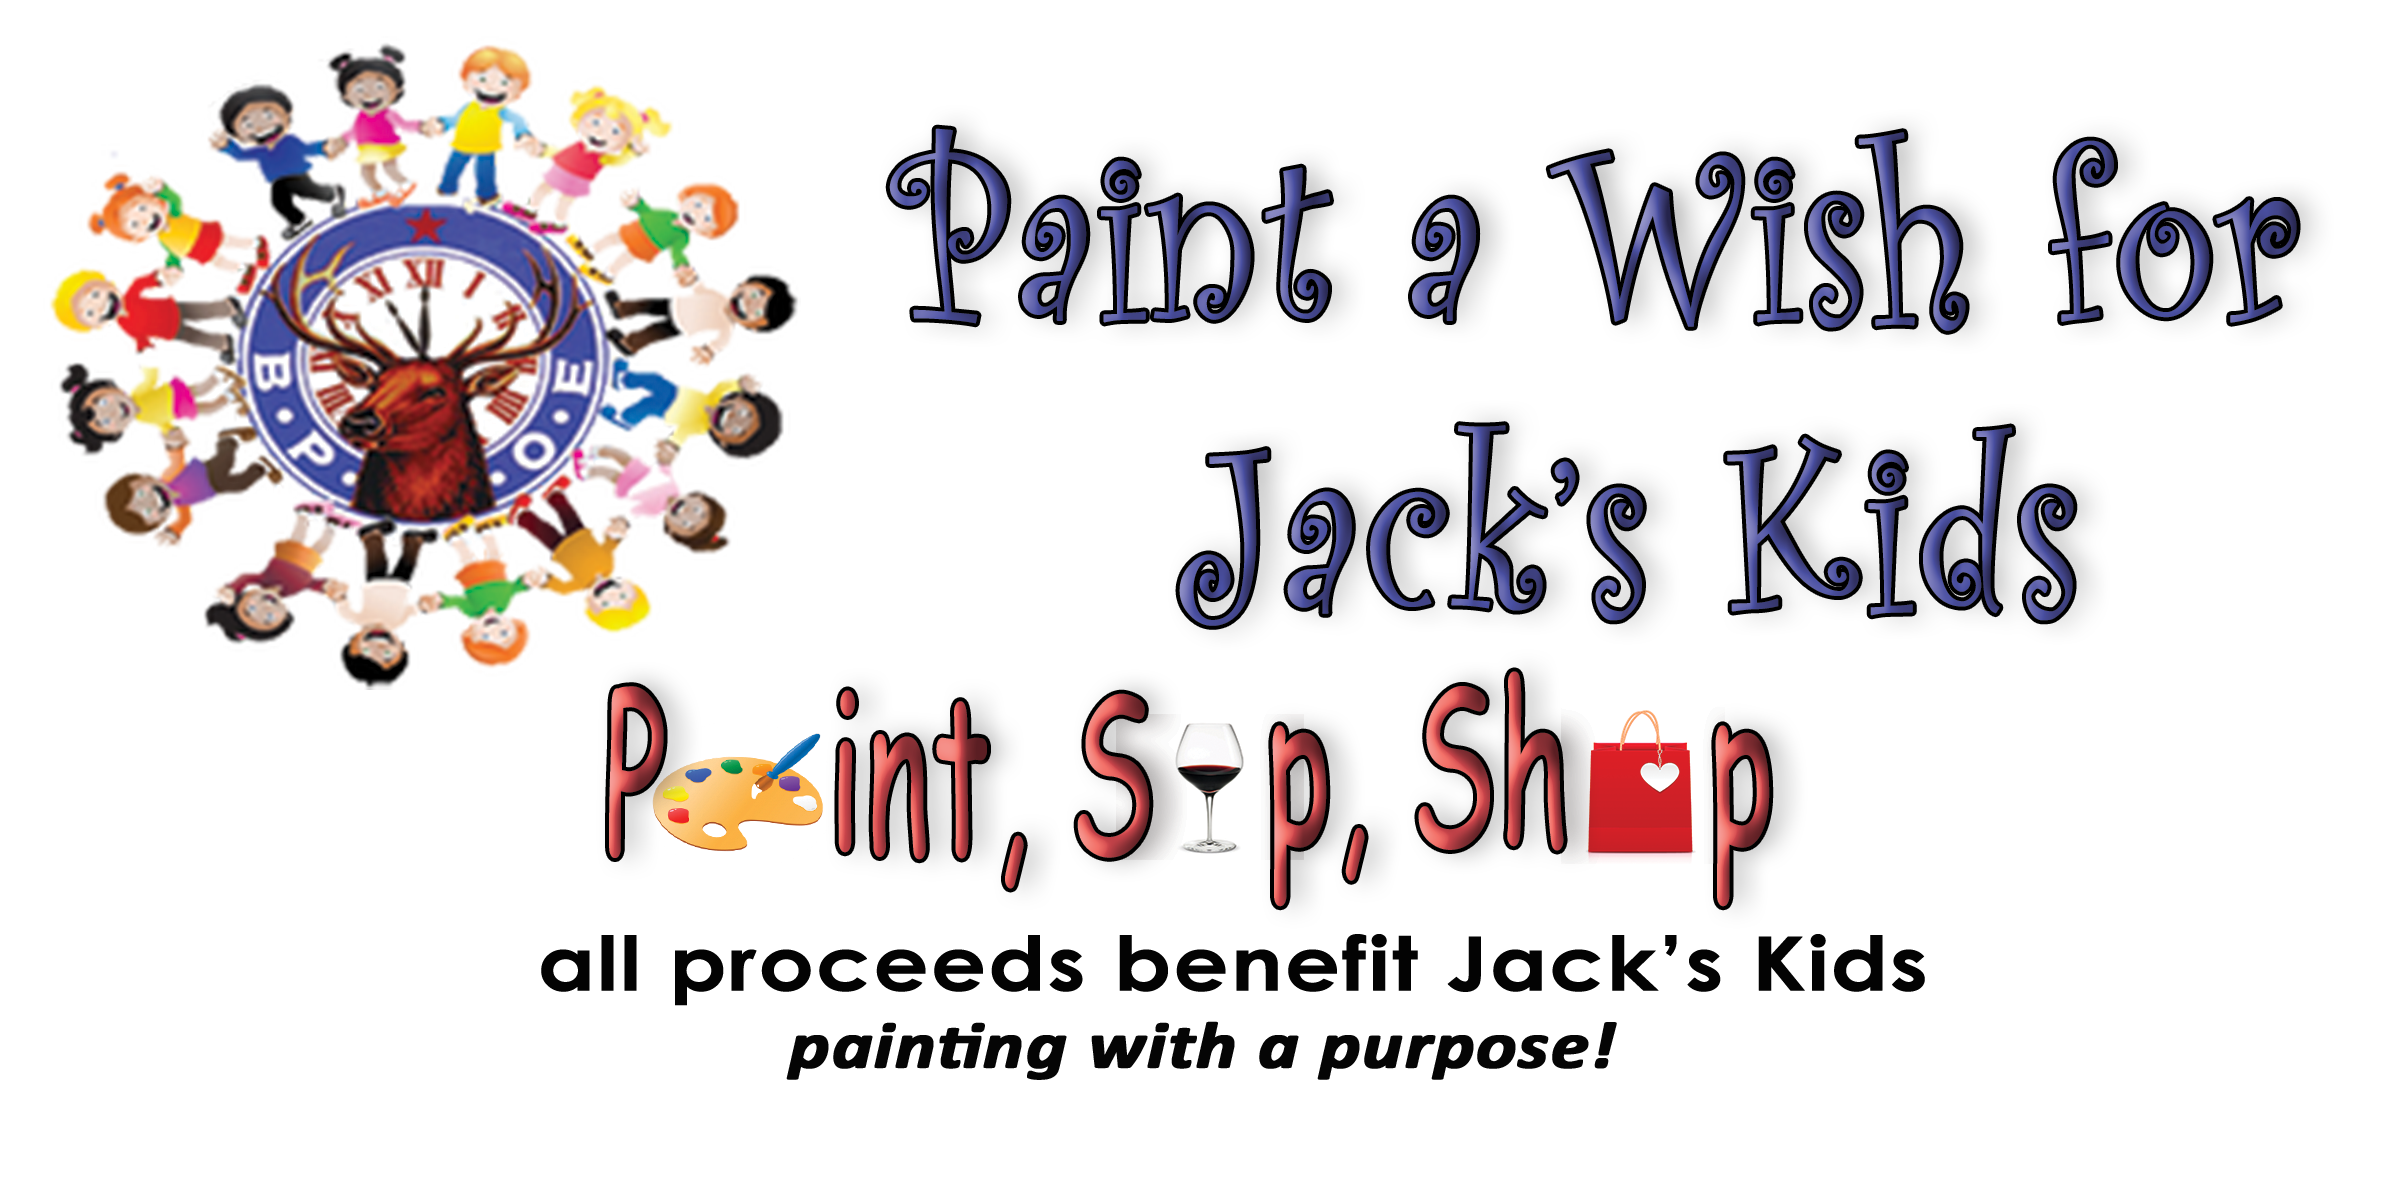 Paint a wish for. Fundraiser clipart upcoming event